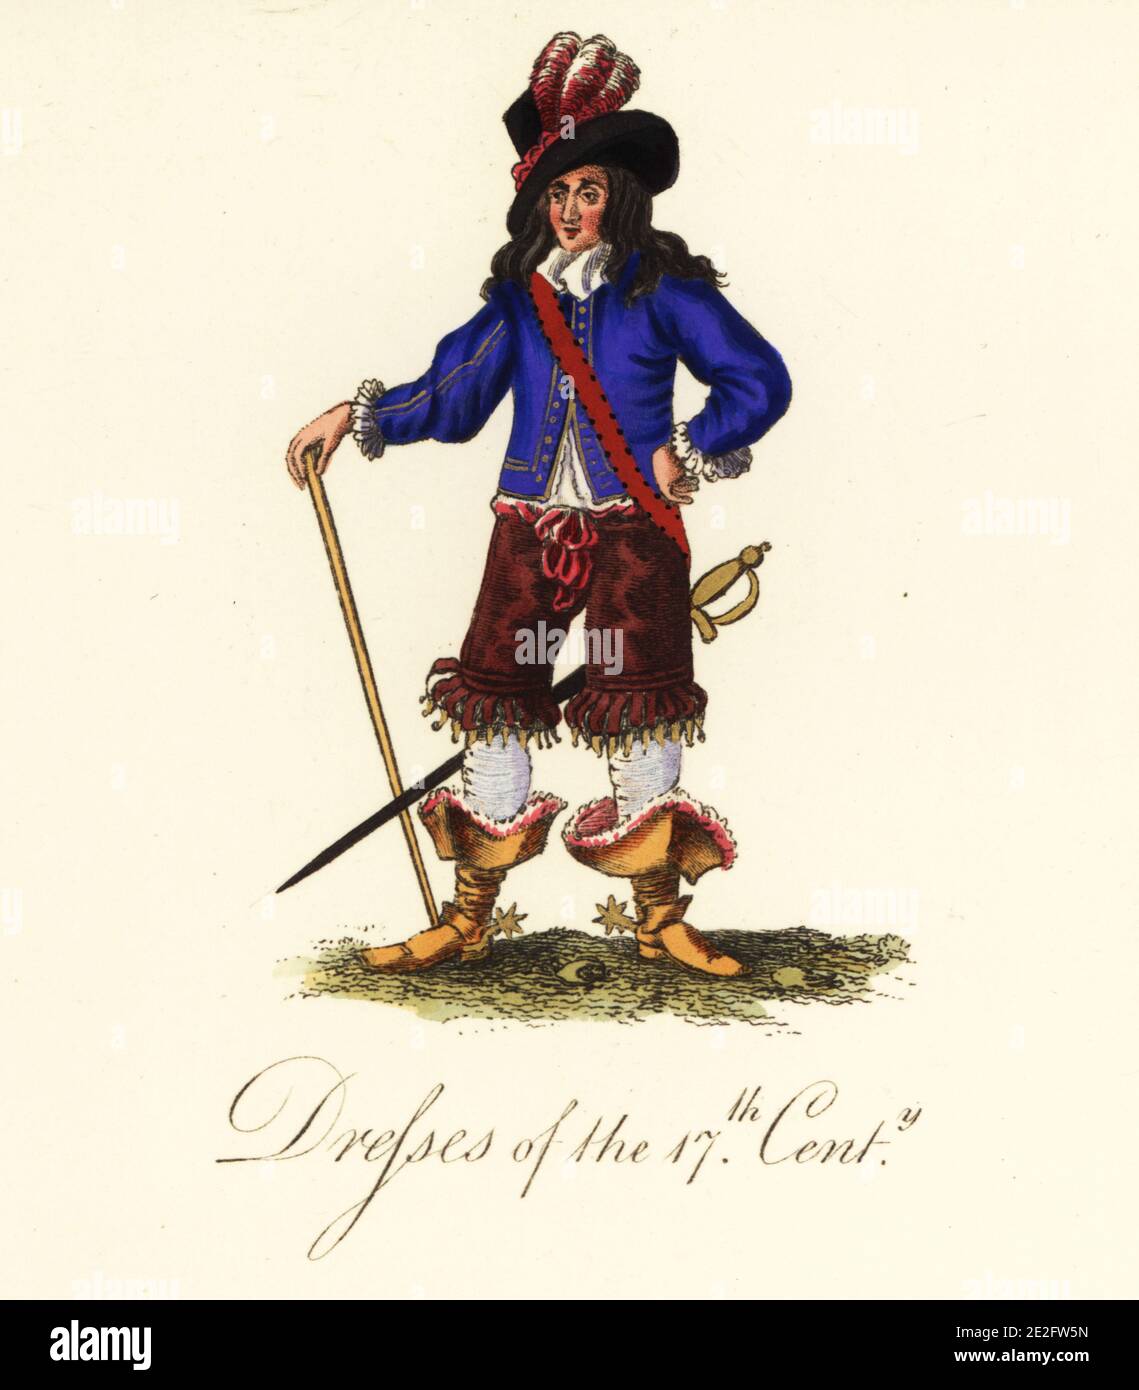 Restoration foppish beau in feathered hat, wig, blue jacket, frilled  breeches, hose and boots, sword and spurs, from an etching by Richard  Gaywood. Dress of the 17th century. Handcoloured engraving by Joseph